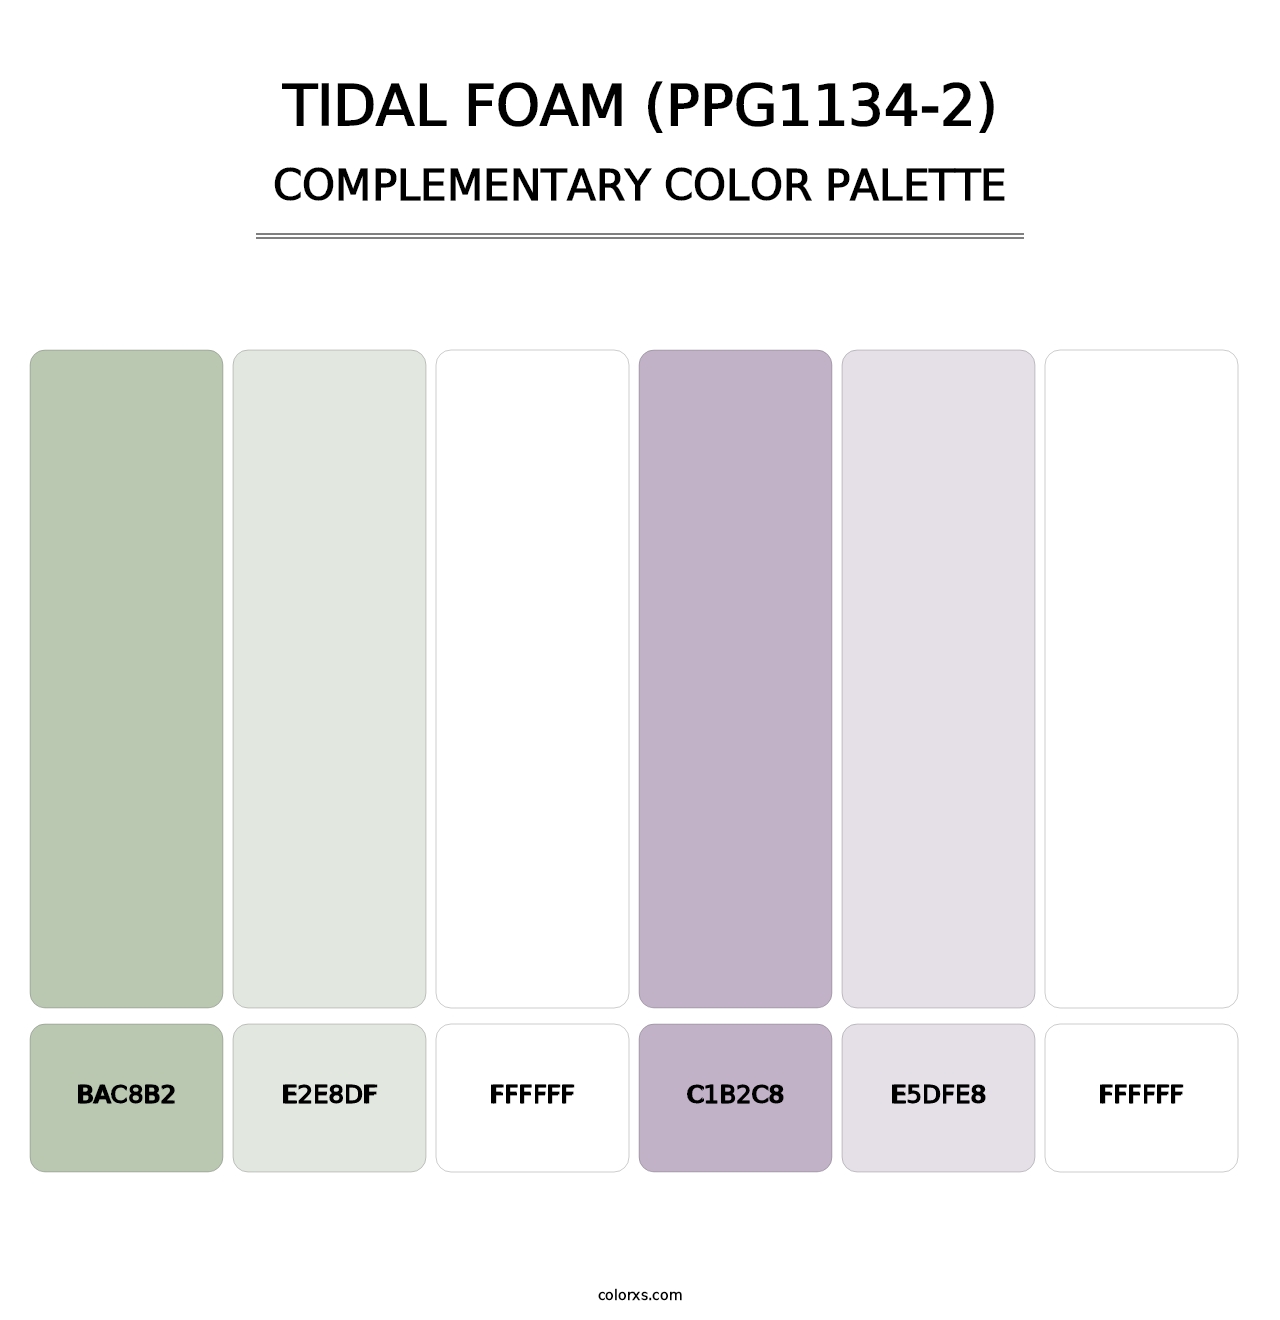 Tidal Foam (PPG1134-2) - Complementary Color Palette